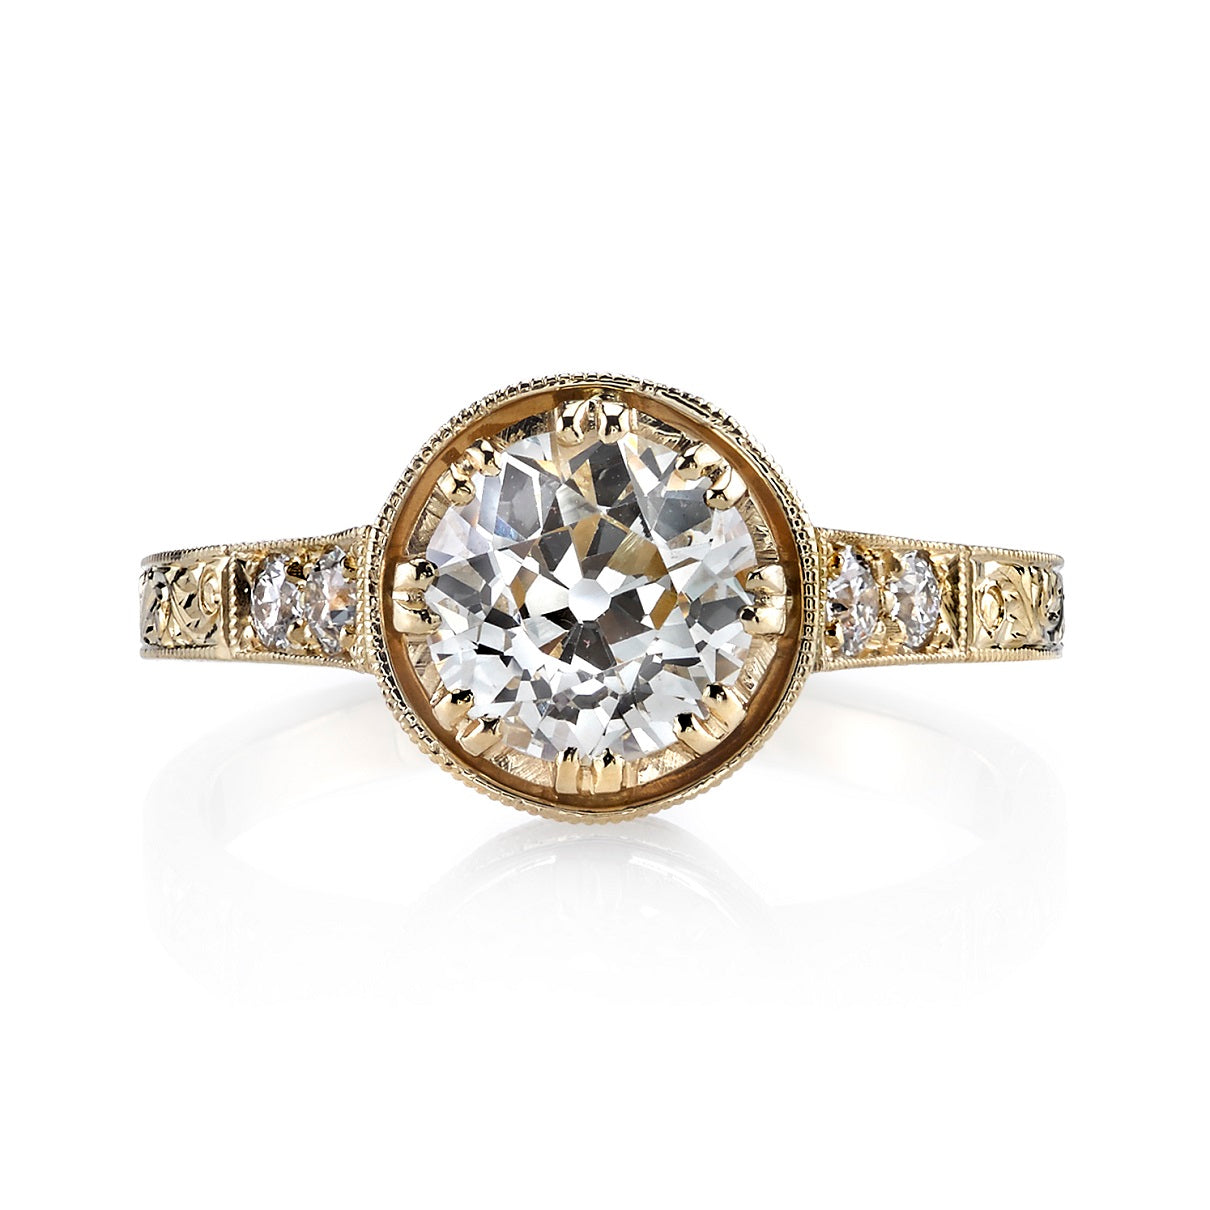 SINGLE STONE AUBREY RING featuring 1.20ct J/VS2 EGL certified old European cut diamond with 0.13ctw old European cut accent diamonds set in a handcrafted 18K yellow gold mounting.